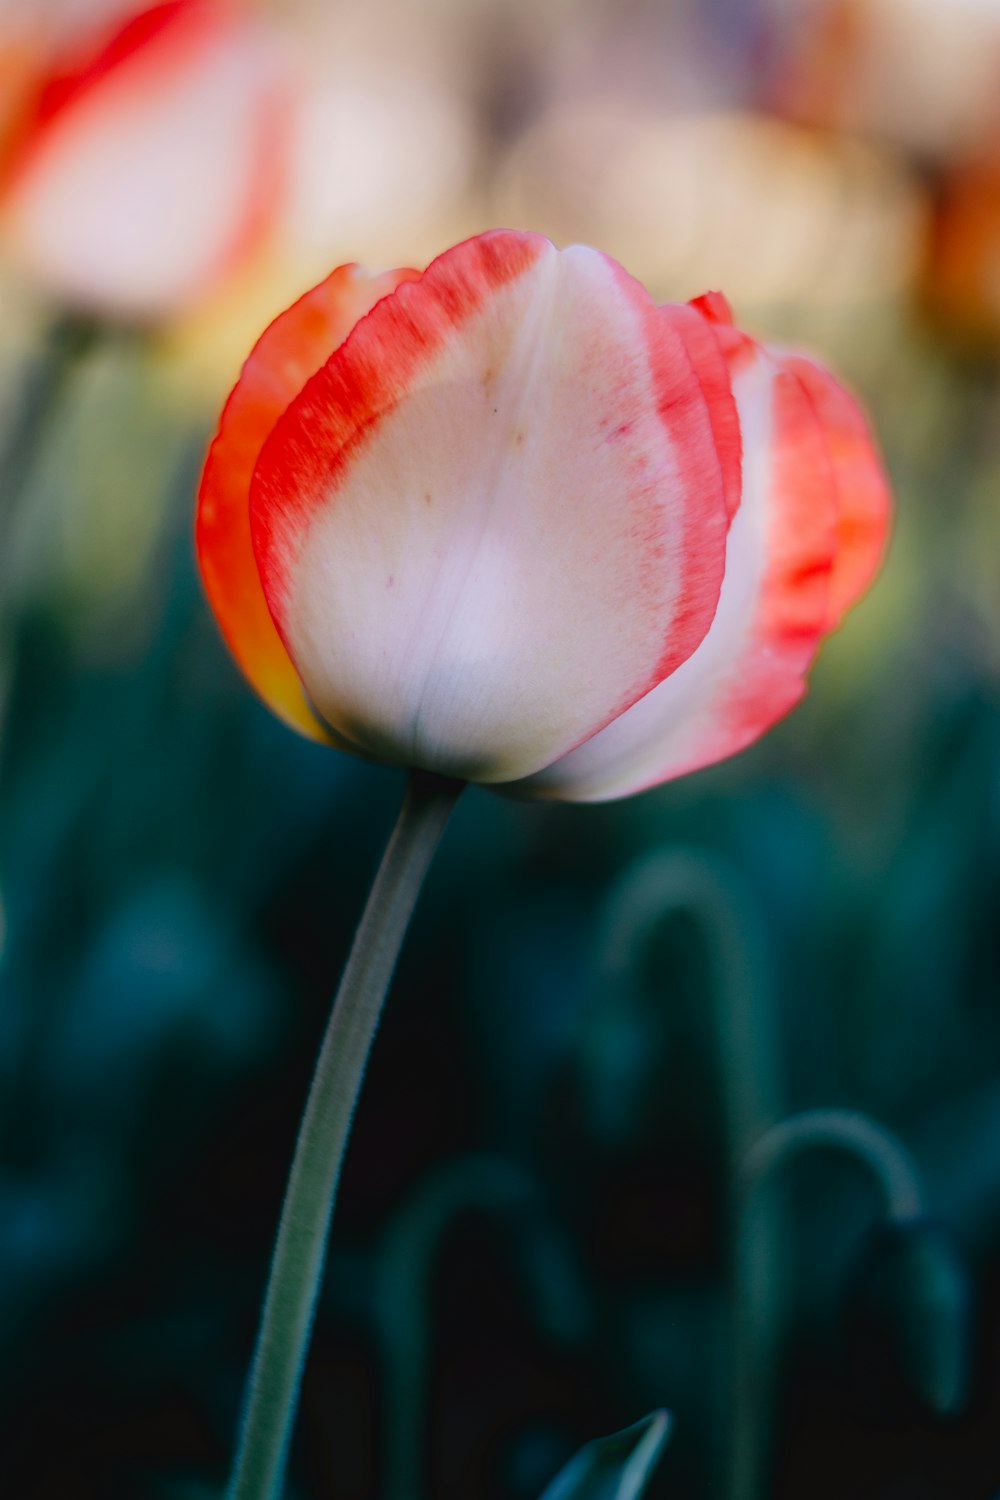 a single red and white tulip in a garden